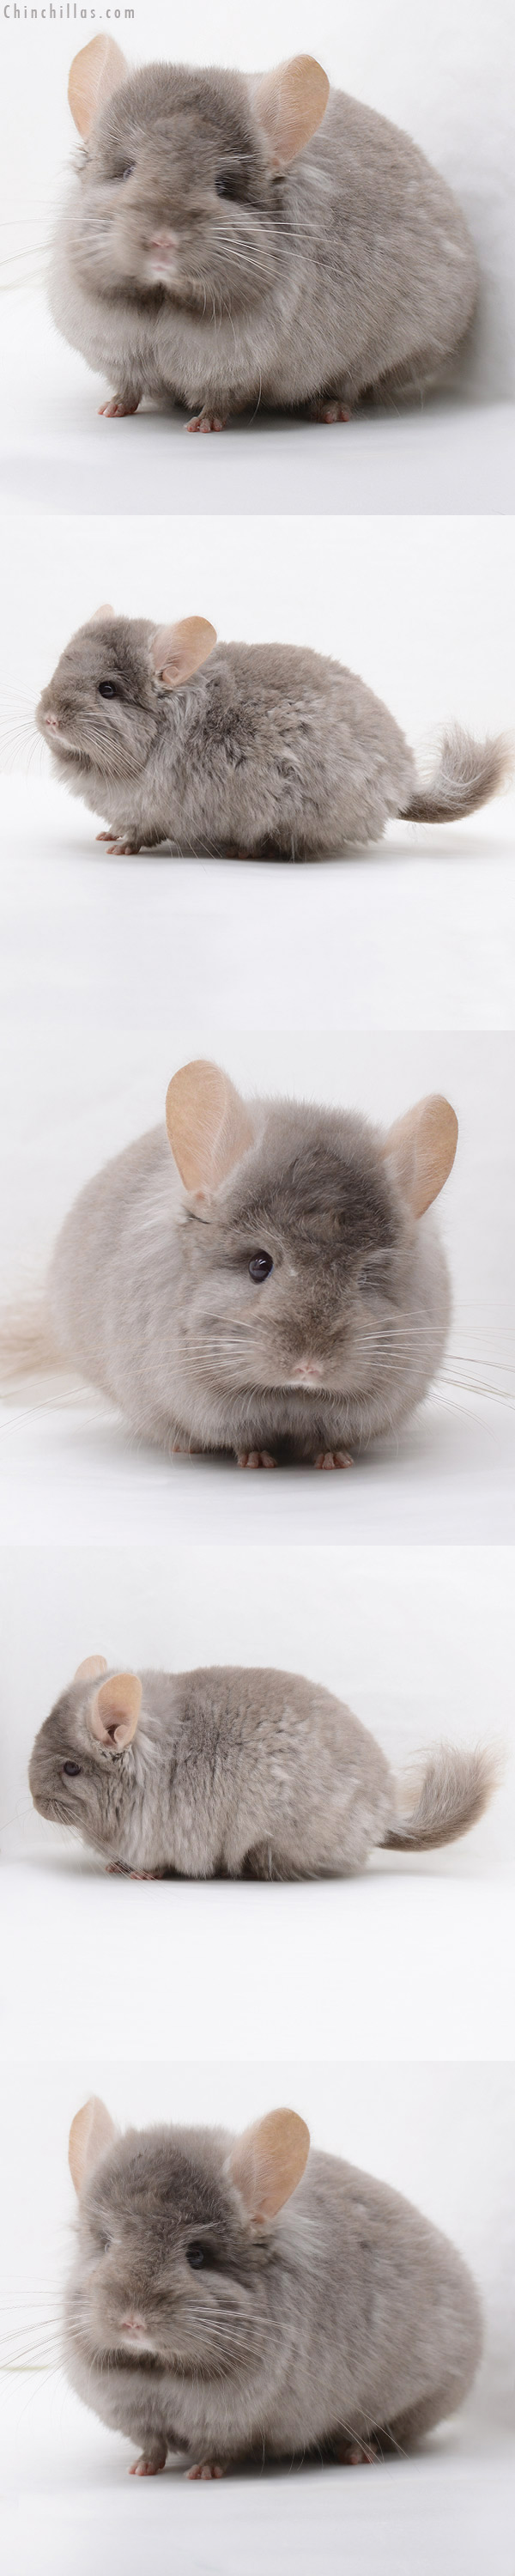 Chinchilla or related item offered for sale or export on Chinchillas.com - 20233 Tan ( Locken Carrier )  Royal Persian Angora Male Chinchilla